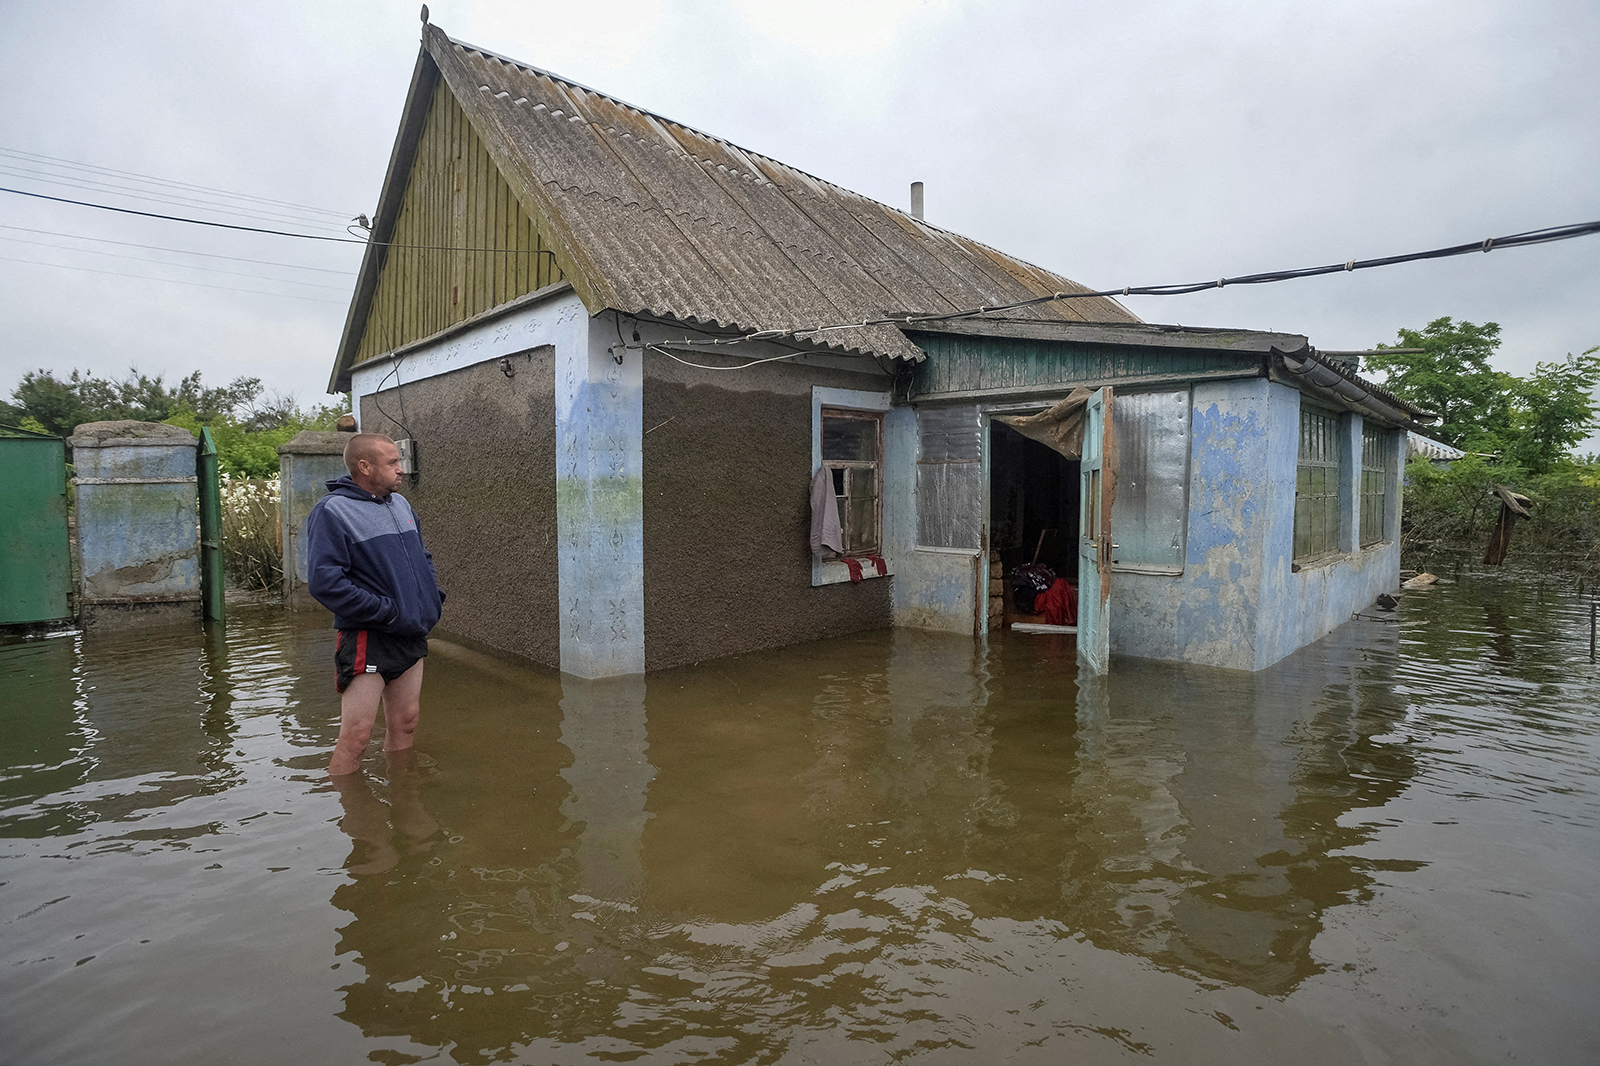 A local resident stands near a flooded house after the Nova Kakhovka dam breached, in Afanasiivka, Kherson region, Ukraine on June 12.